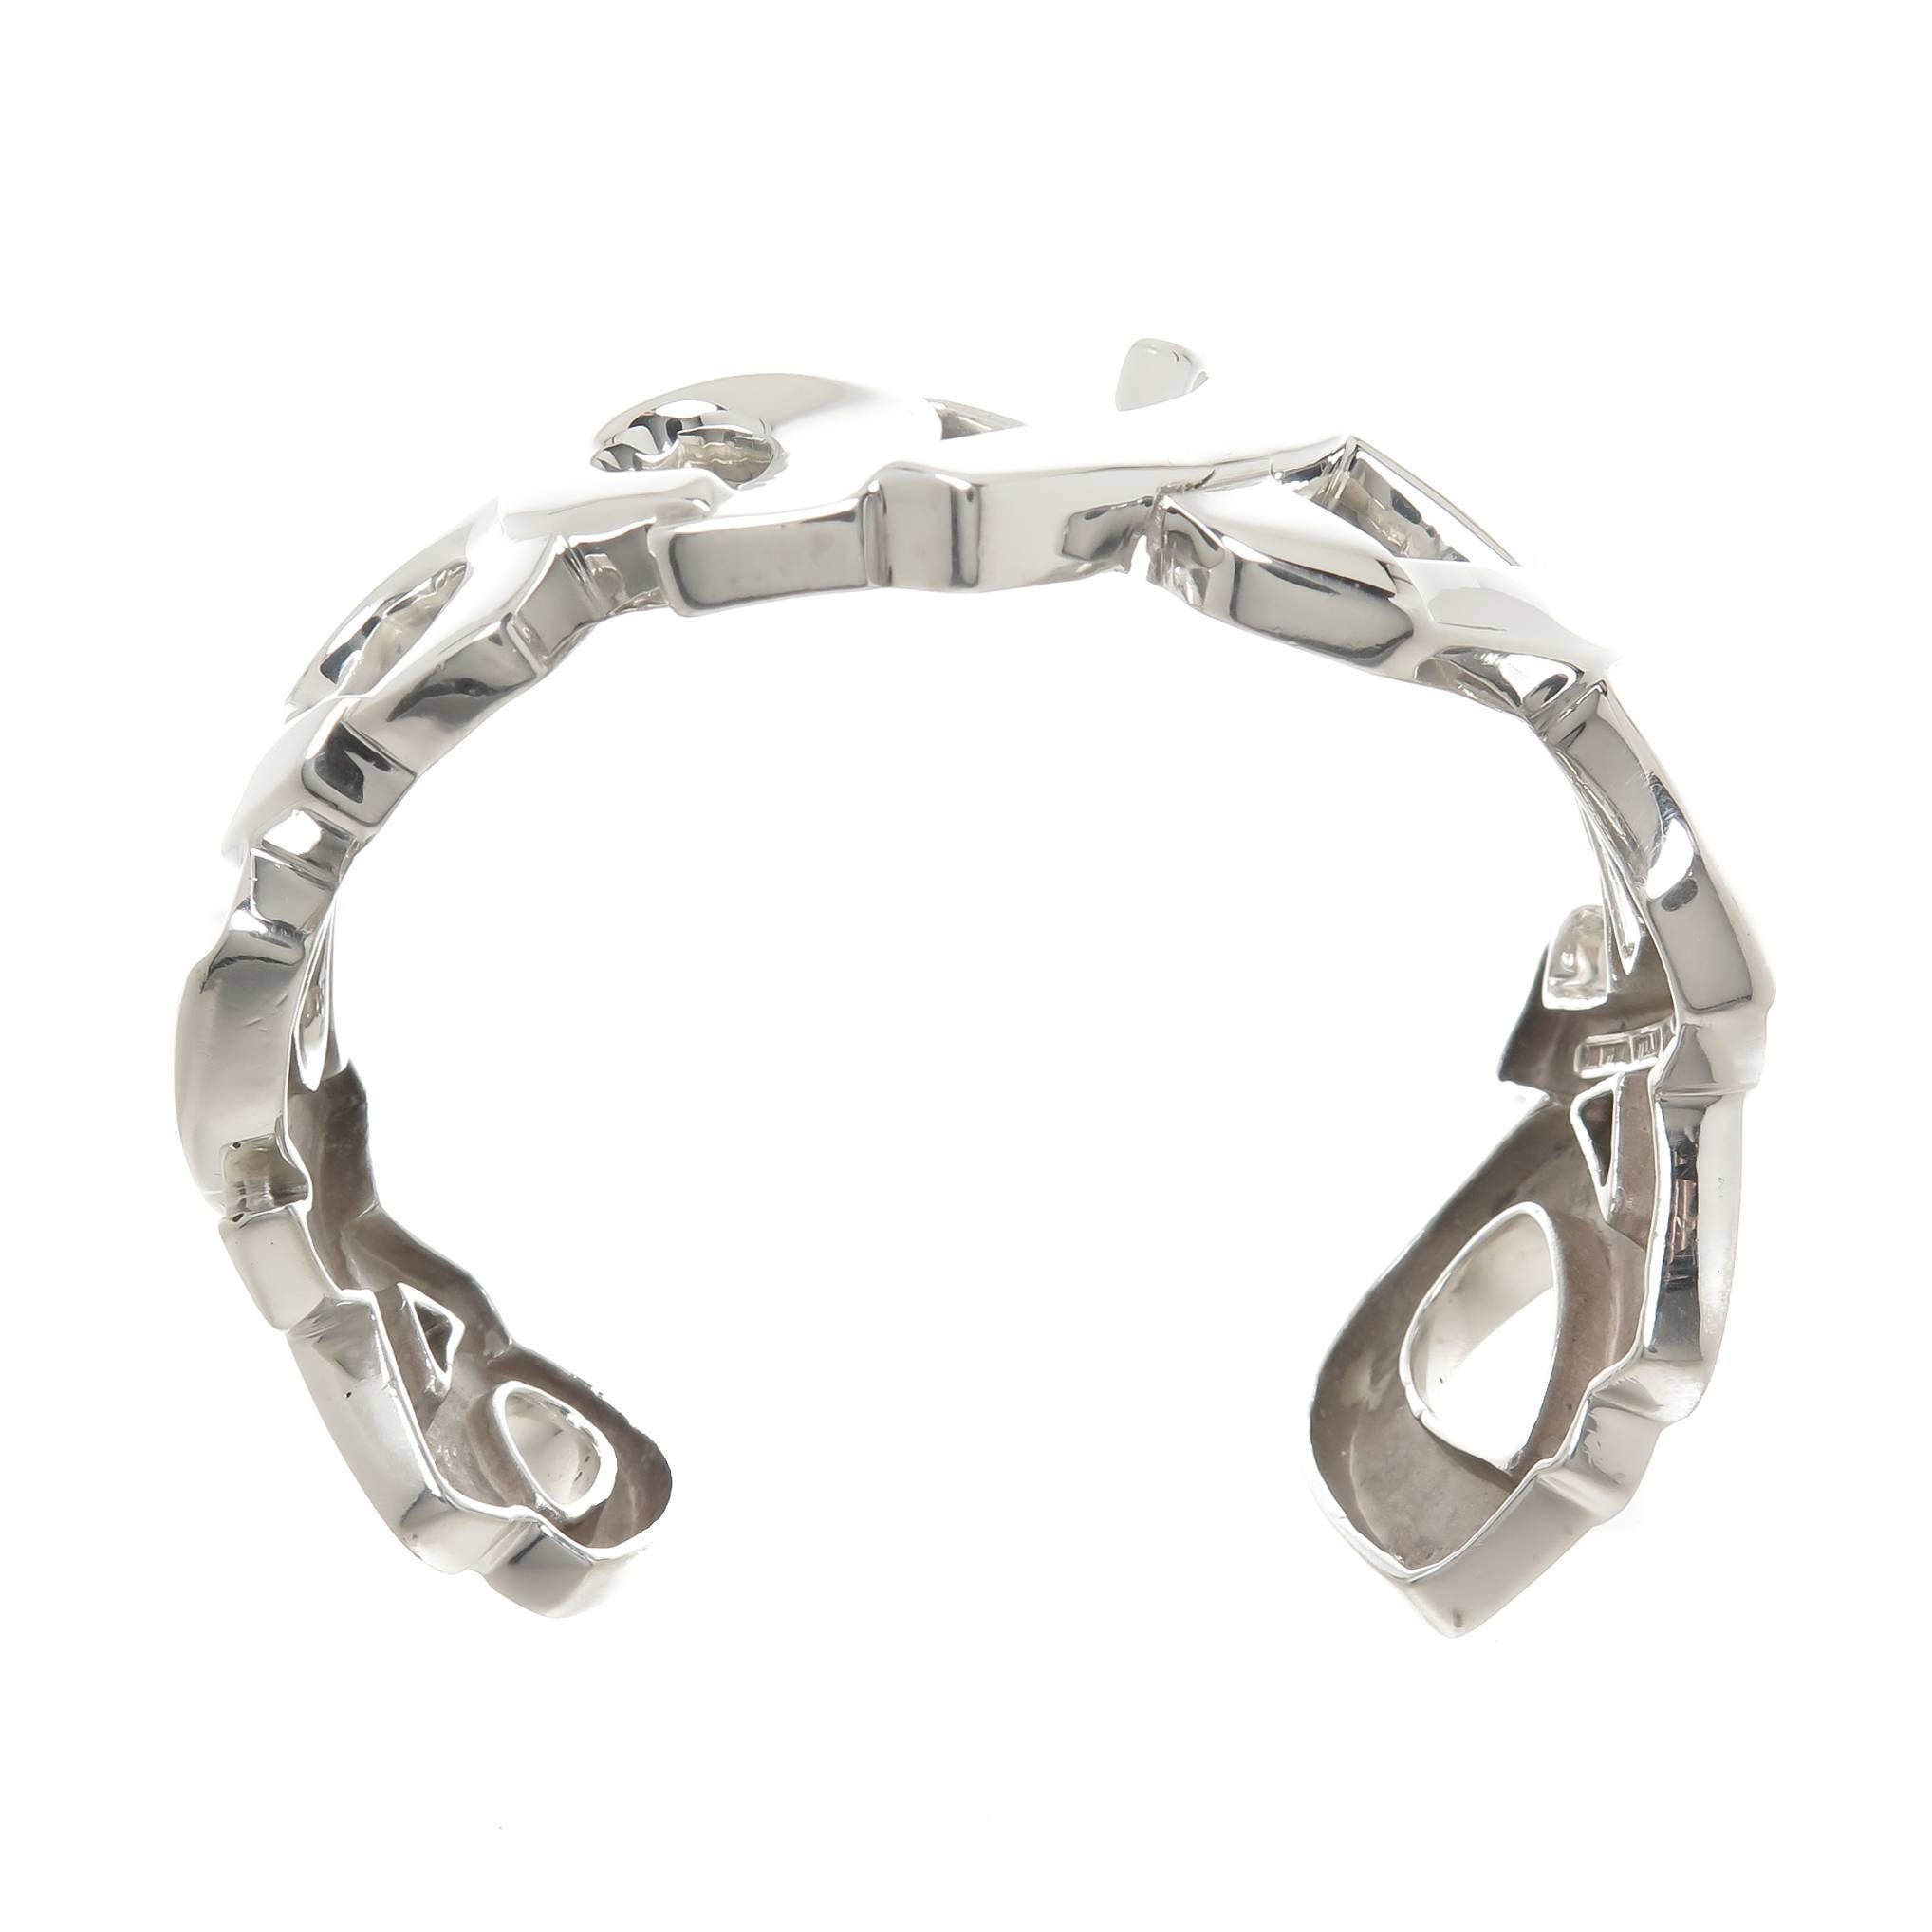 Circa 1980s Paloma Picasso for Tiffany & Company Sterling Silver XO Love and Kisses Bracelet, measuring 1 1/8 inch wide, inside measurement 6 1/4 inch with a 1 inch wide opening, the bracelet is pliable and can be bent open or closed just a bit for